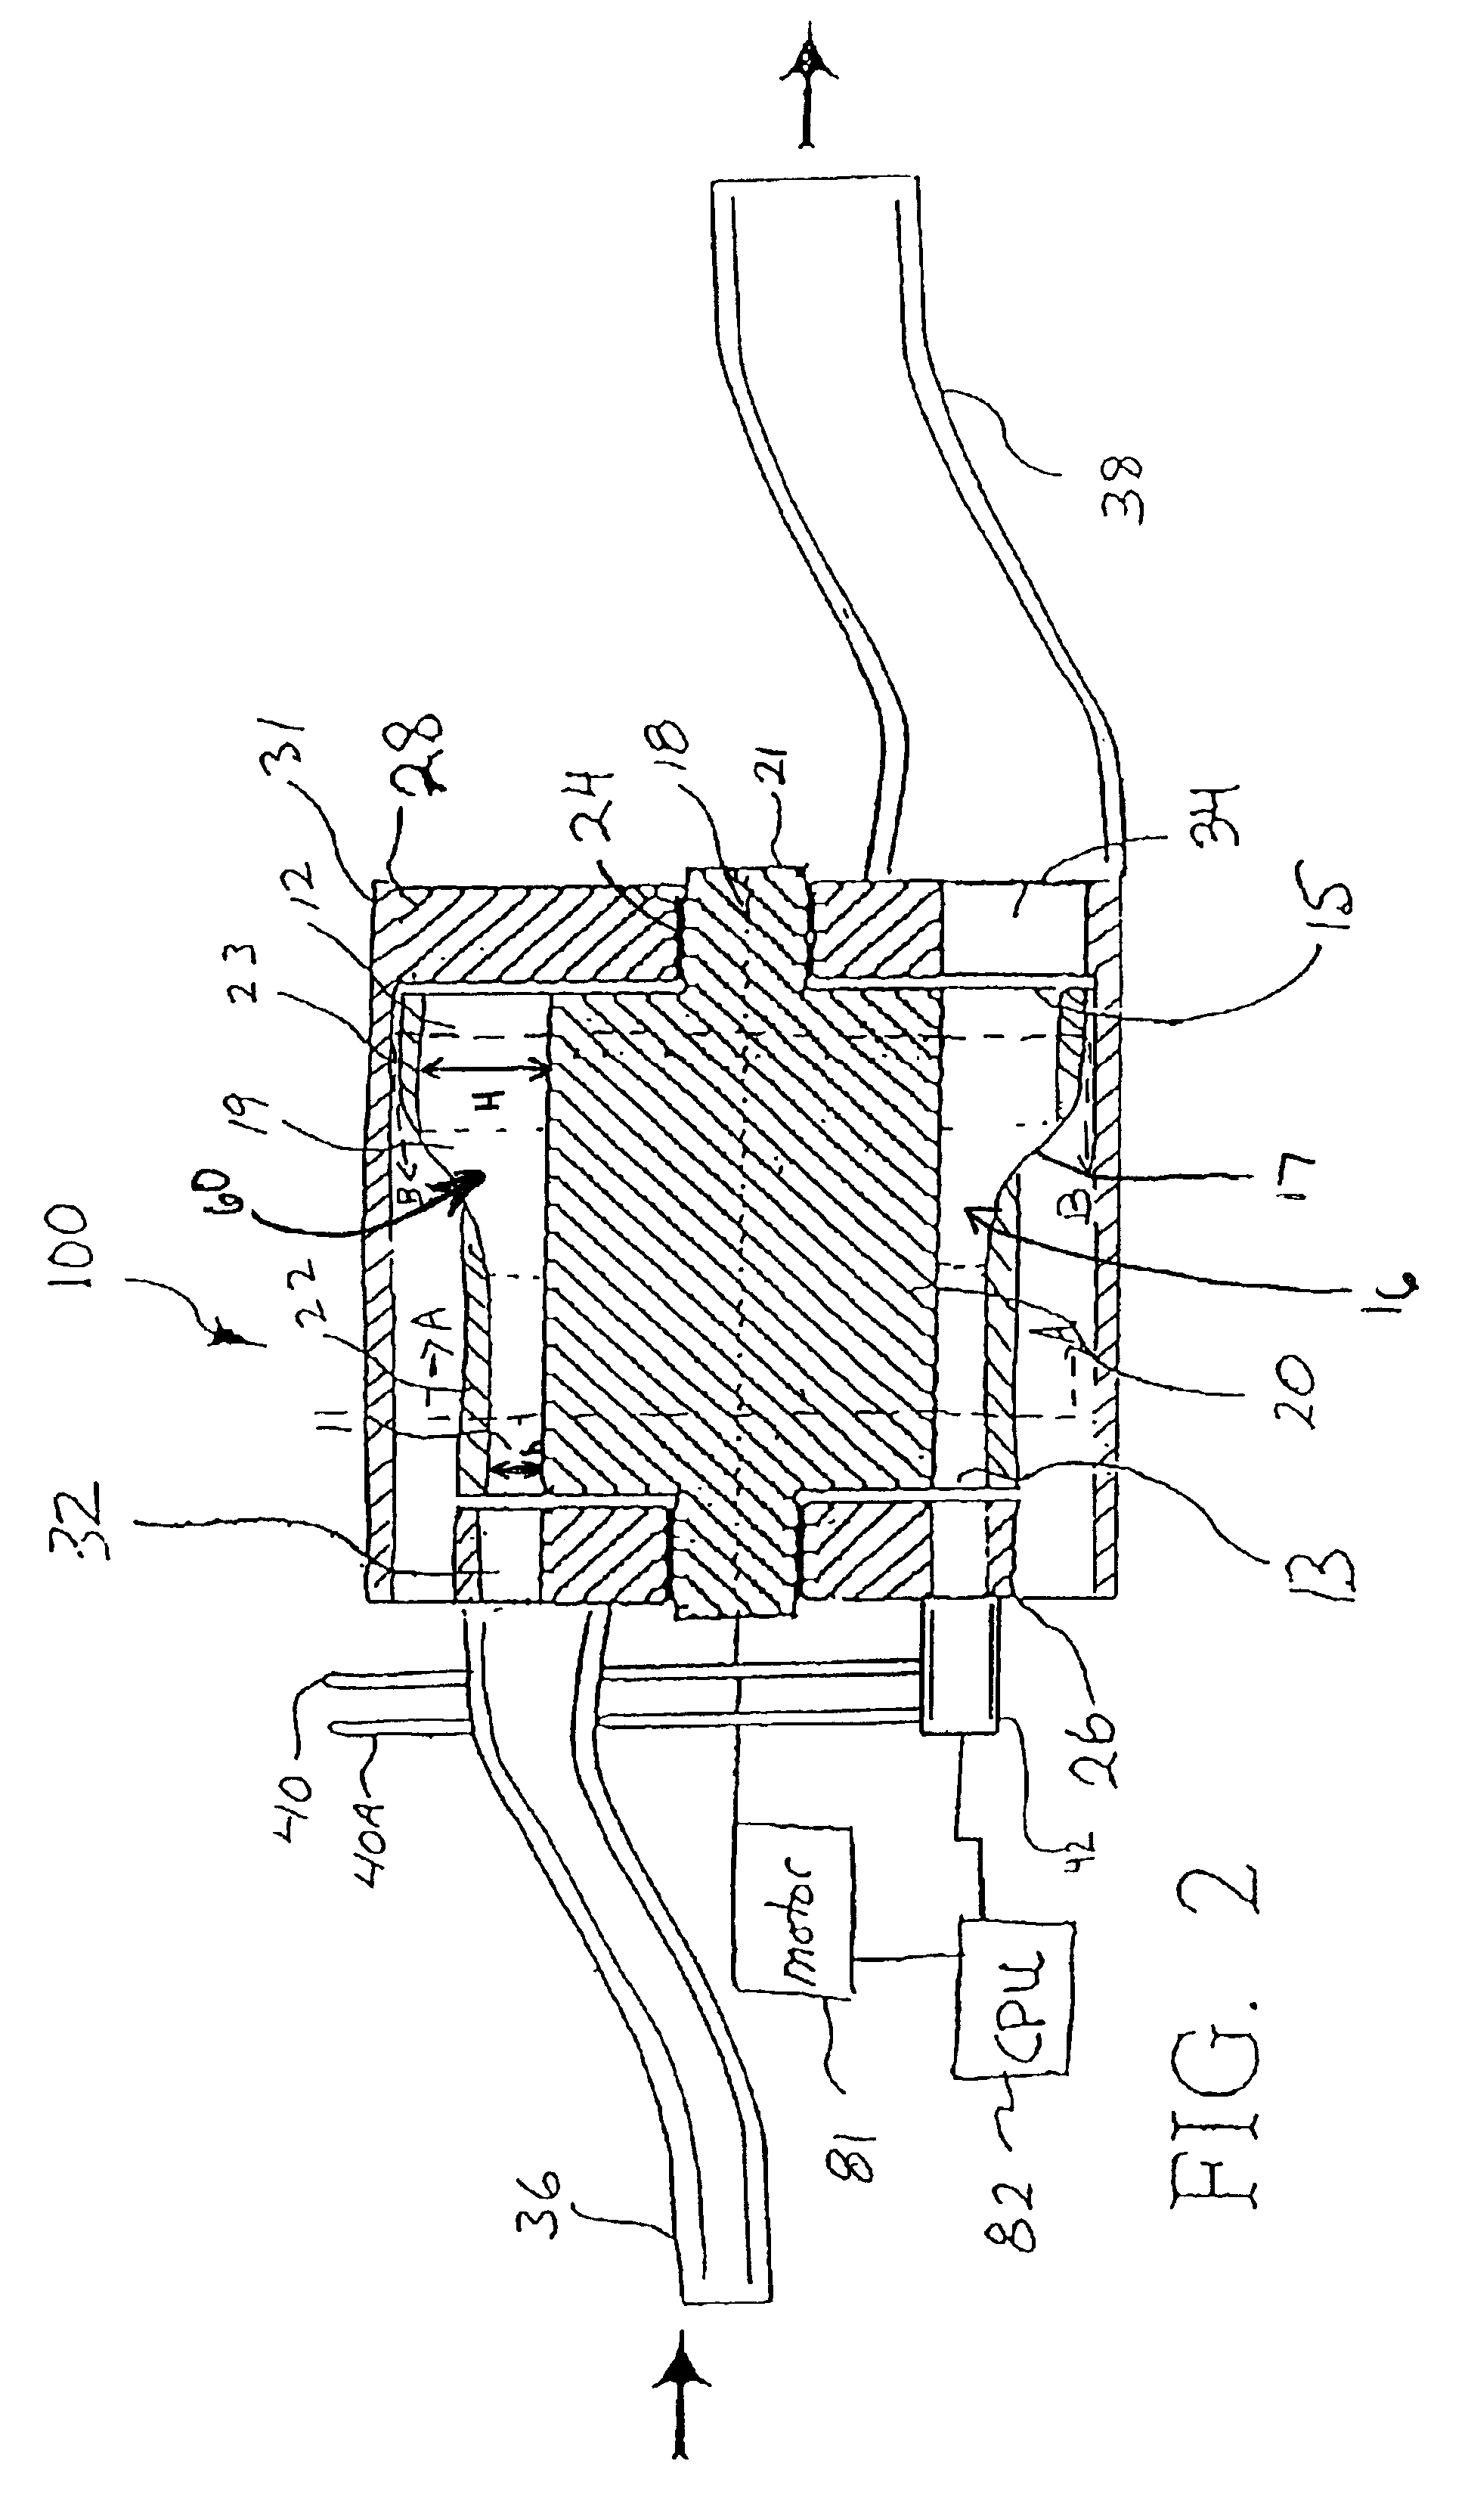 Rotary ejector enhanced pulsed detonation system and method